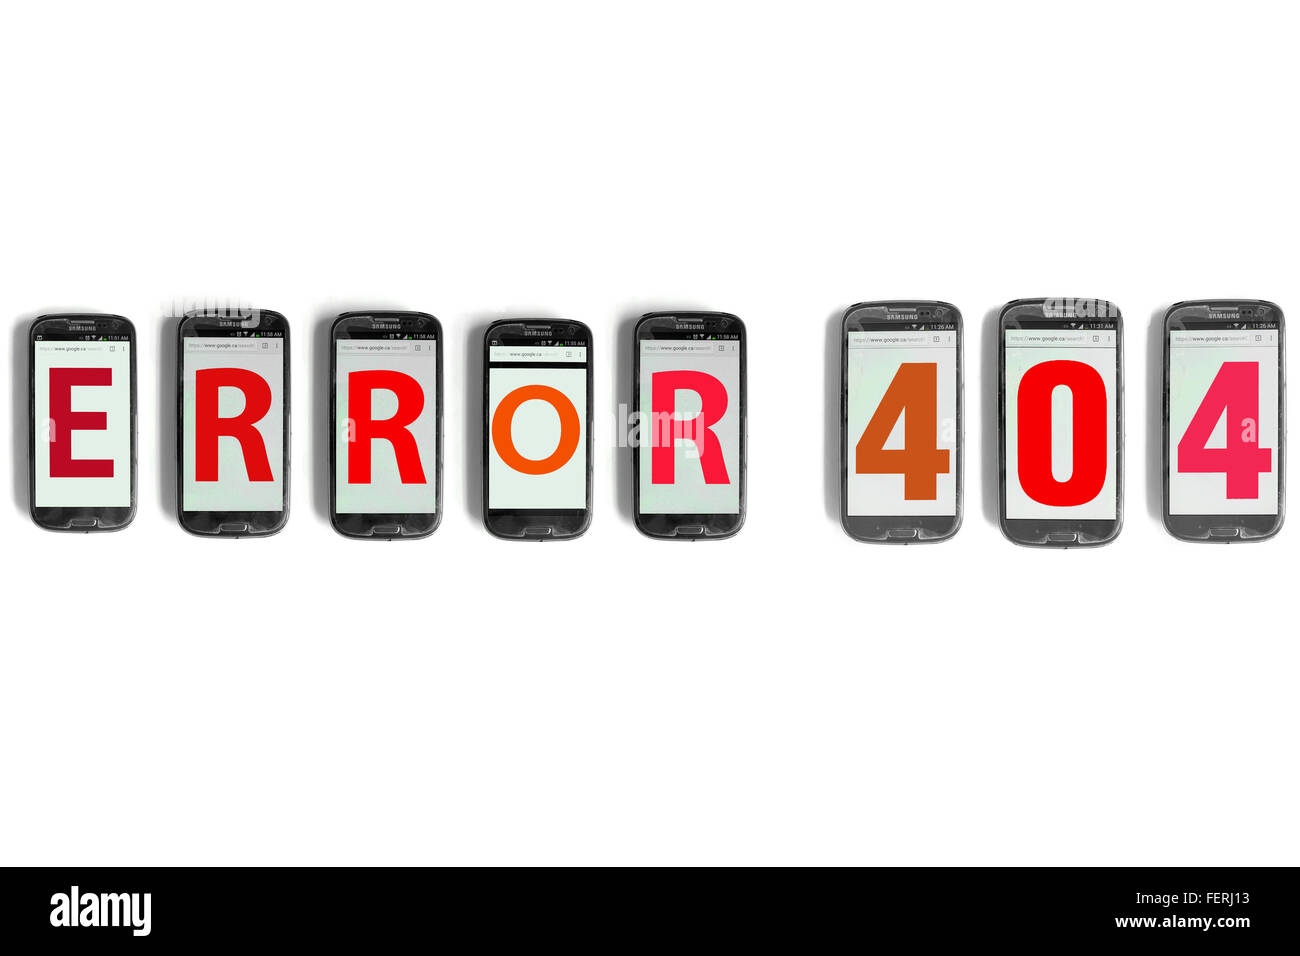 Error 404 on the screens of smartphones photographed against a white background. Stock Photo